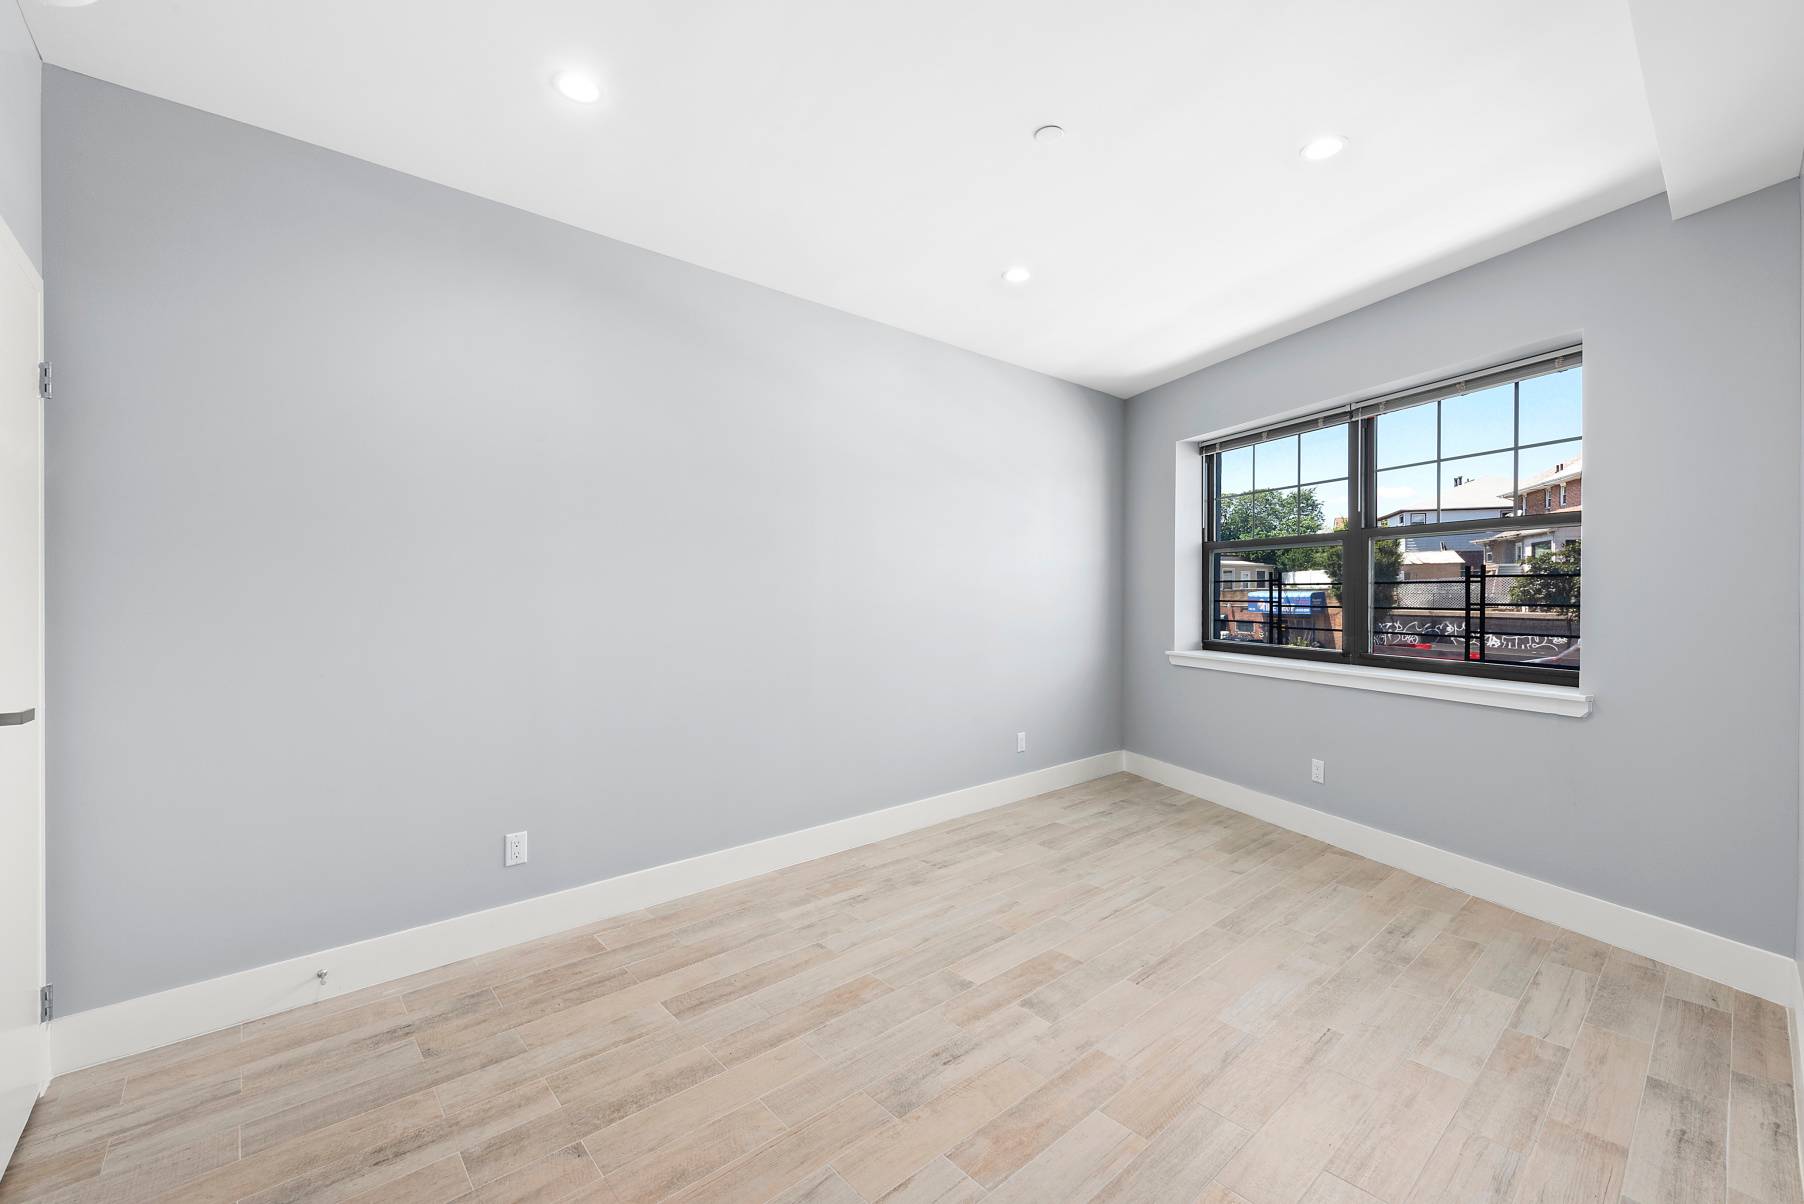 The outstanding, luxury new rental building located in East Elmhurst Close to Flushing, Jackson Heights and Astoria which are culturally rich regions offering some of the best cuisine, entertainment, and ...